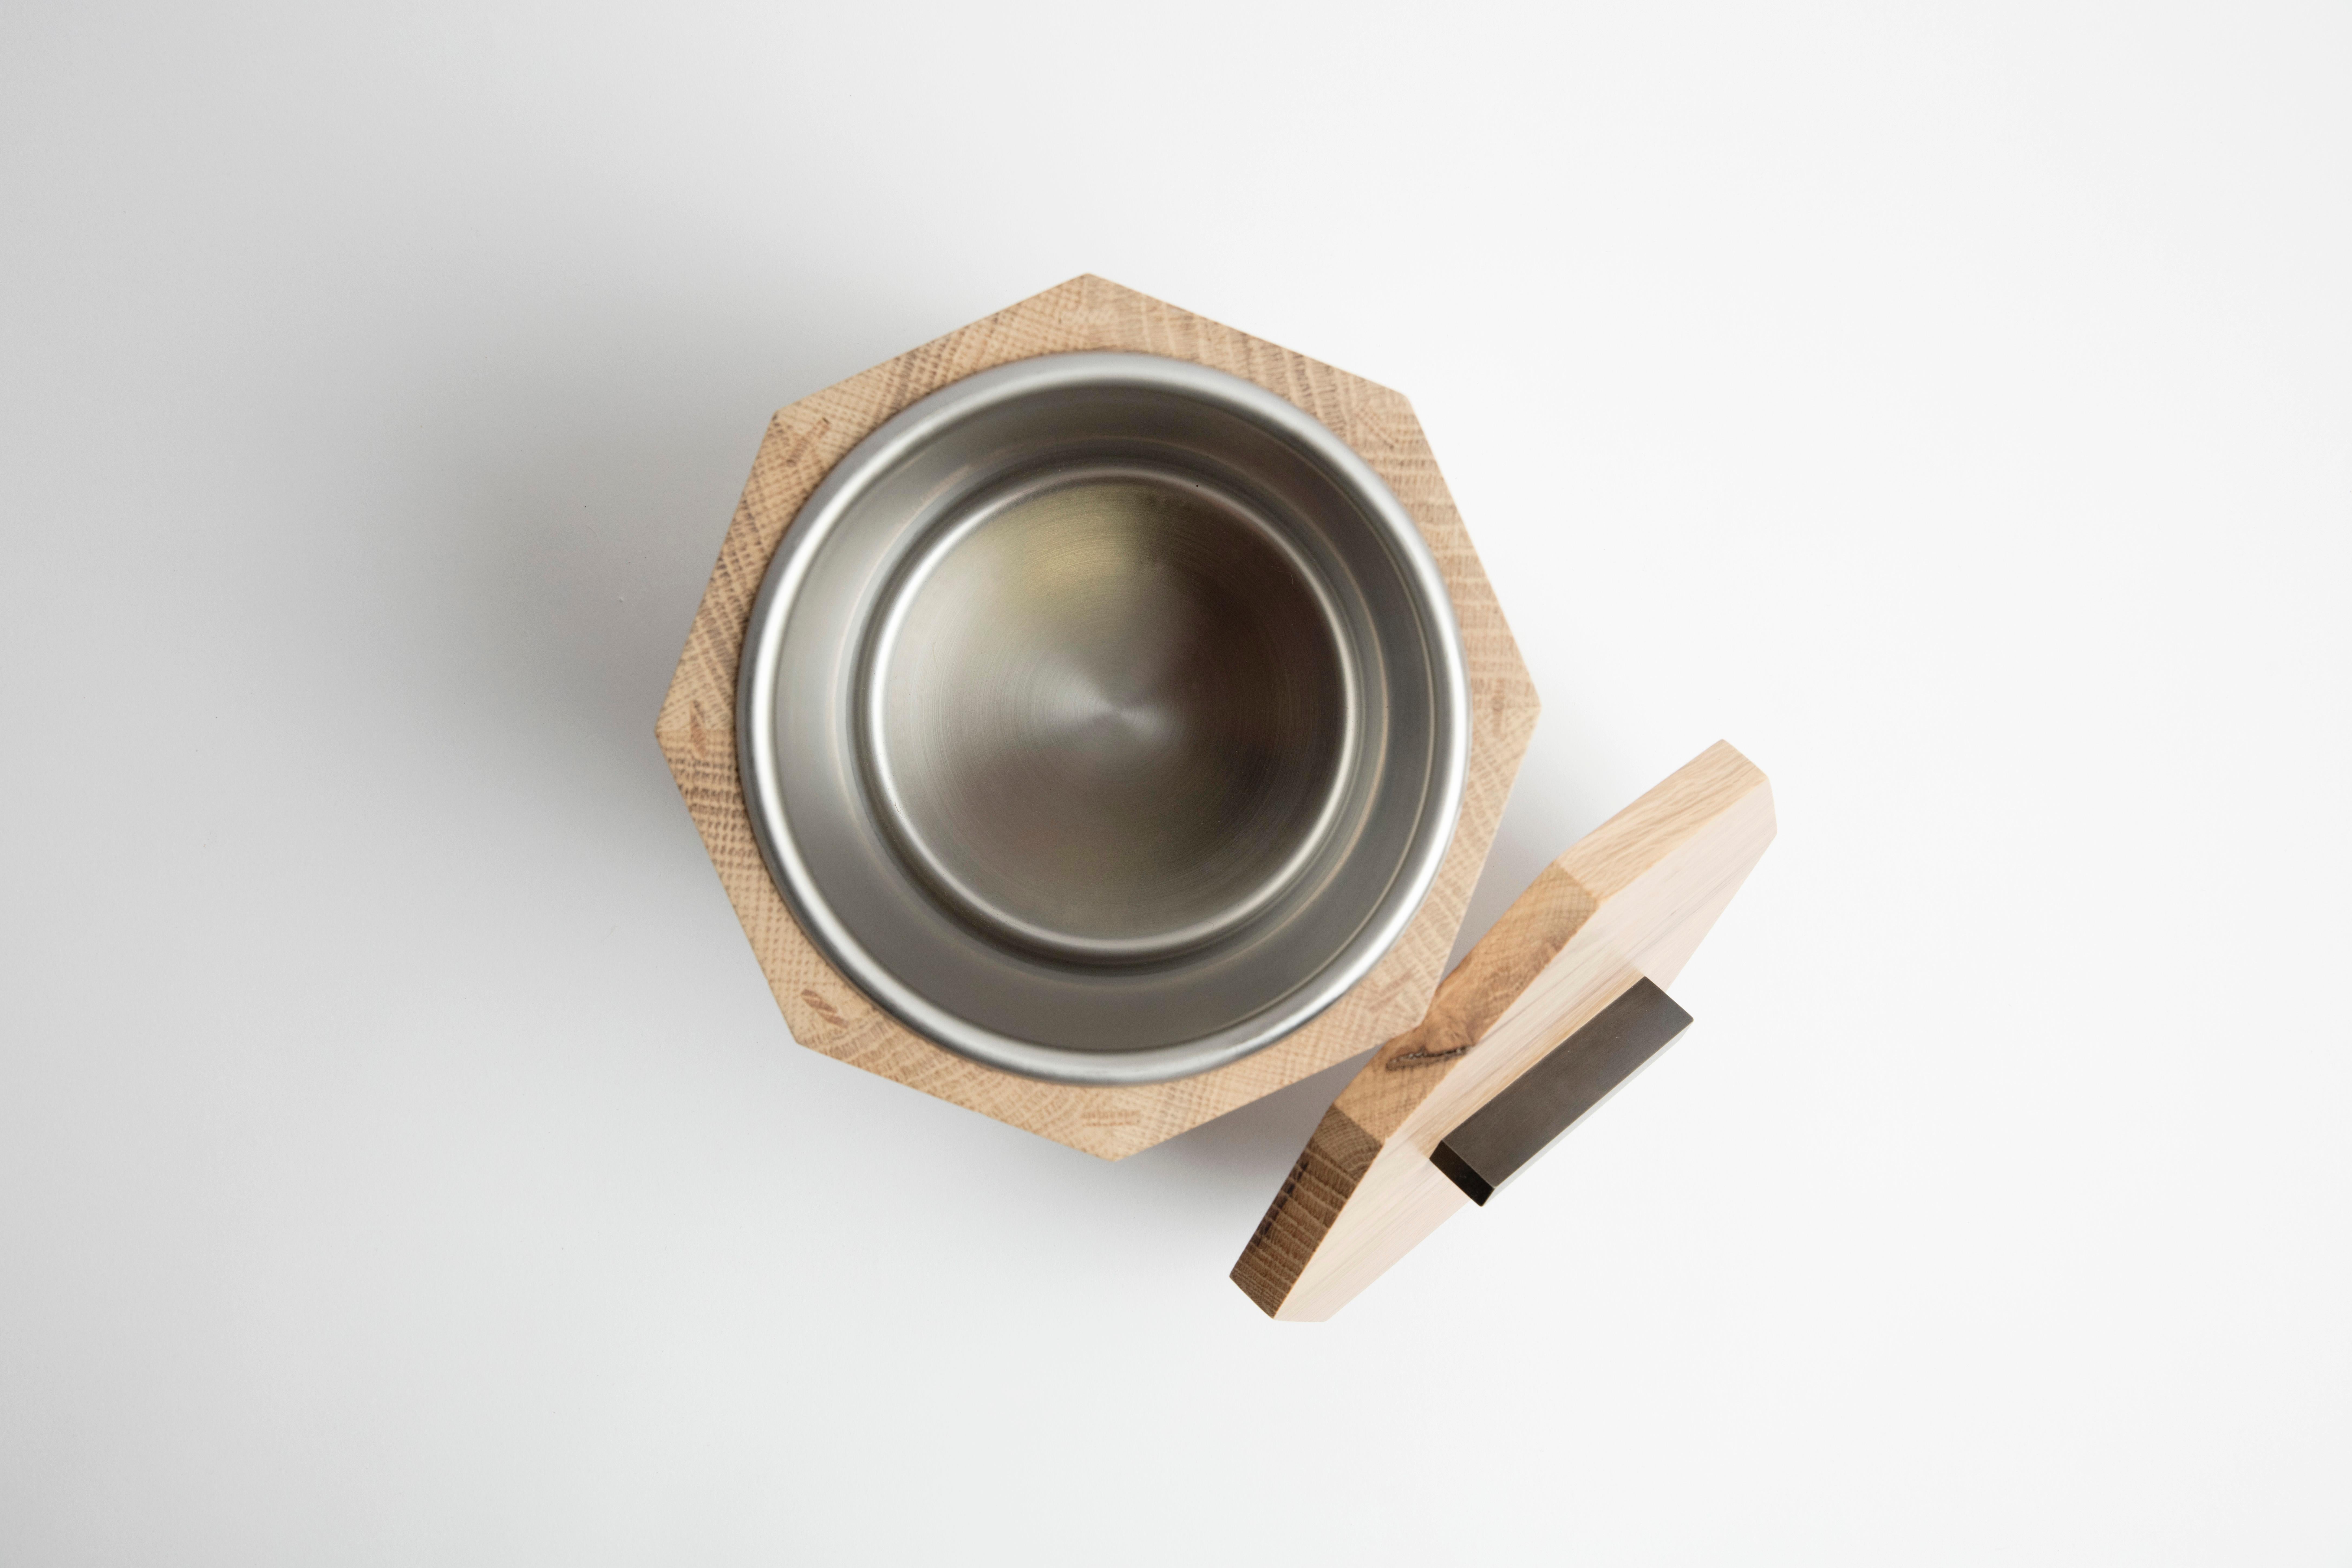 Our solid wood ice bucket is hand-crafted with solid white oak from Birmingham's urban forest. Modern geometric barware strikes a clean line on your counter. Store ice for cocktails or keep a bottle of your favorite white wine cool and crisp for